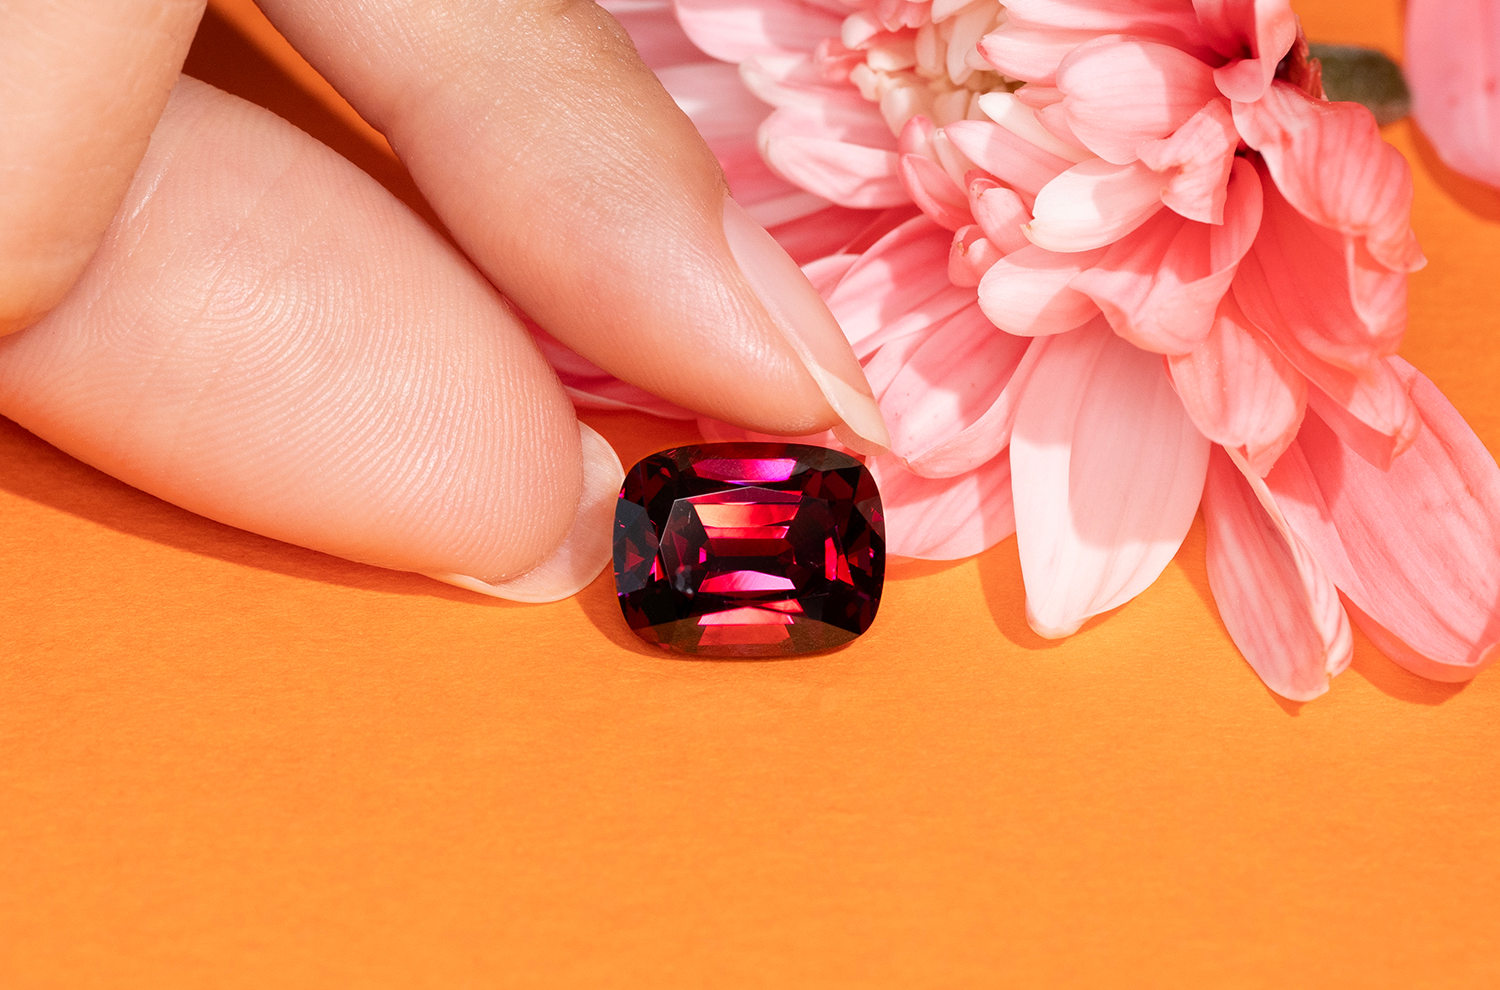 A nicely proportioned, almost 8 carat deep red cushion-cut Garnet is place on an orange background with a pink flower on the side white the tips of the model's fingers are there to show relative size.